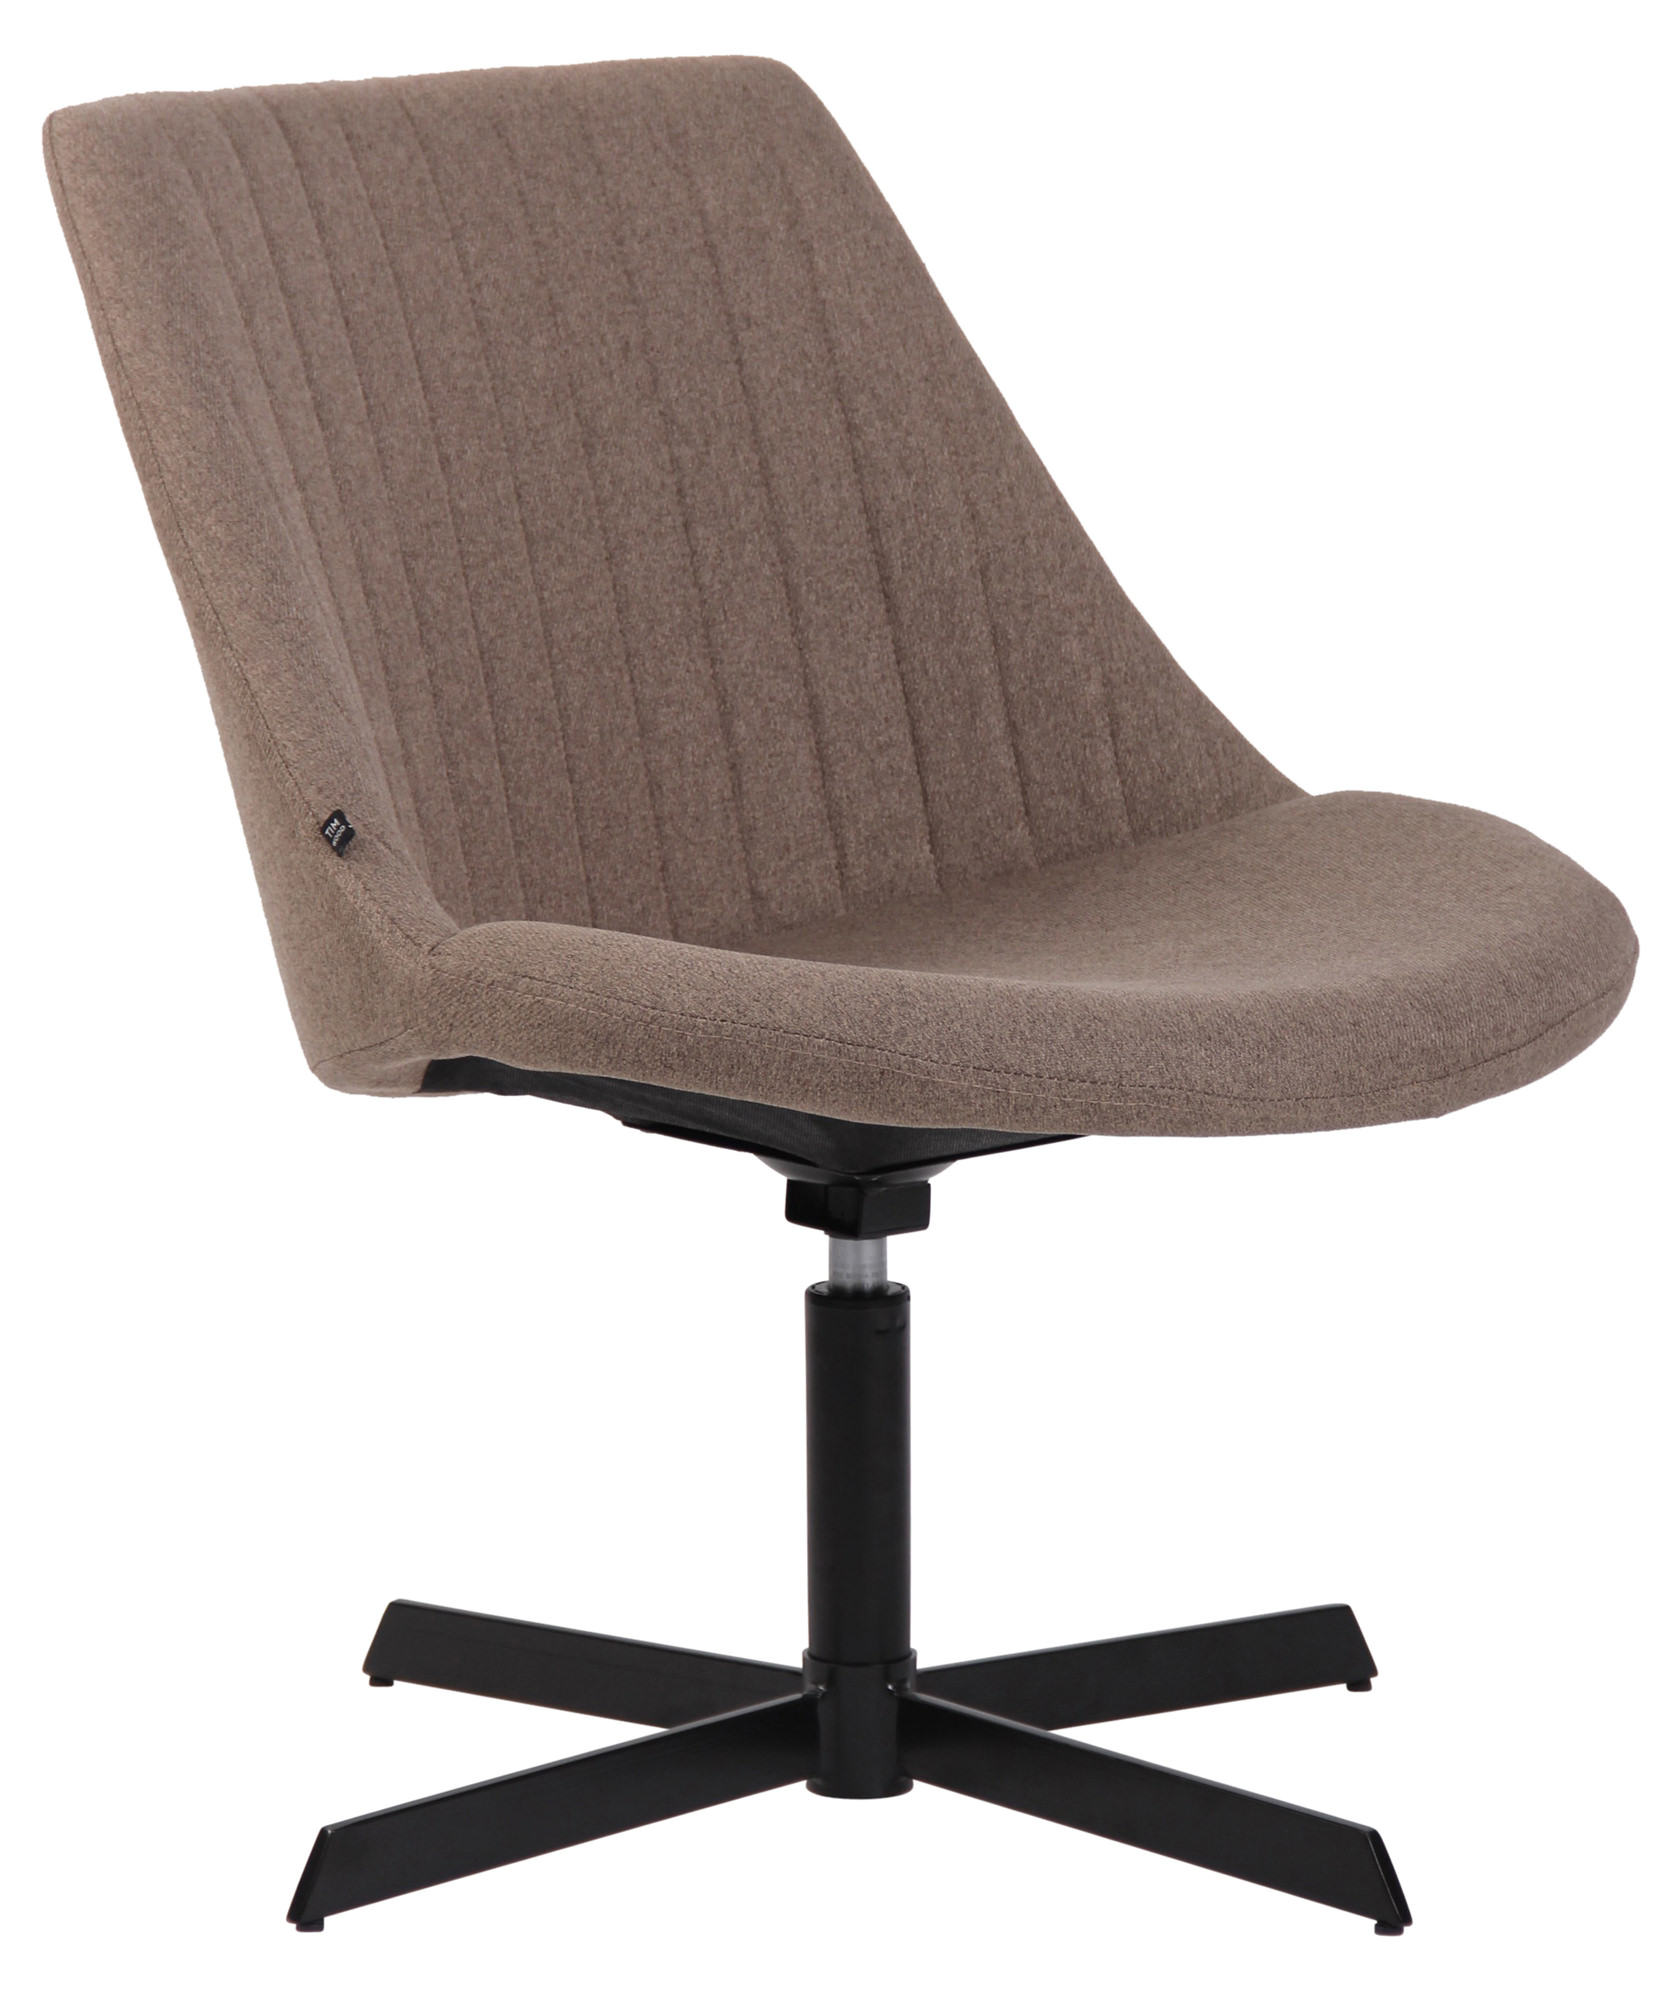 Lounger Granby taupe